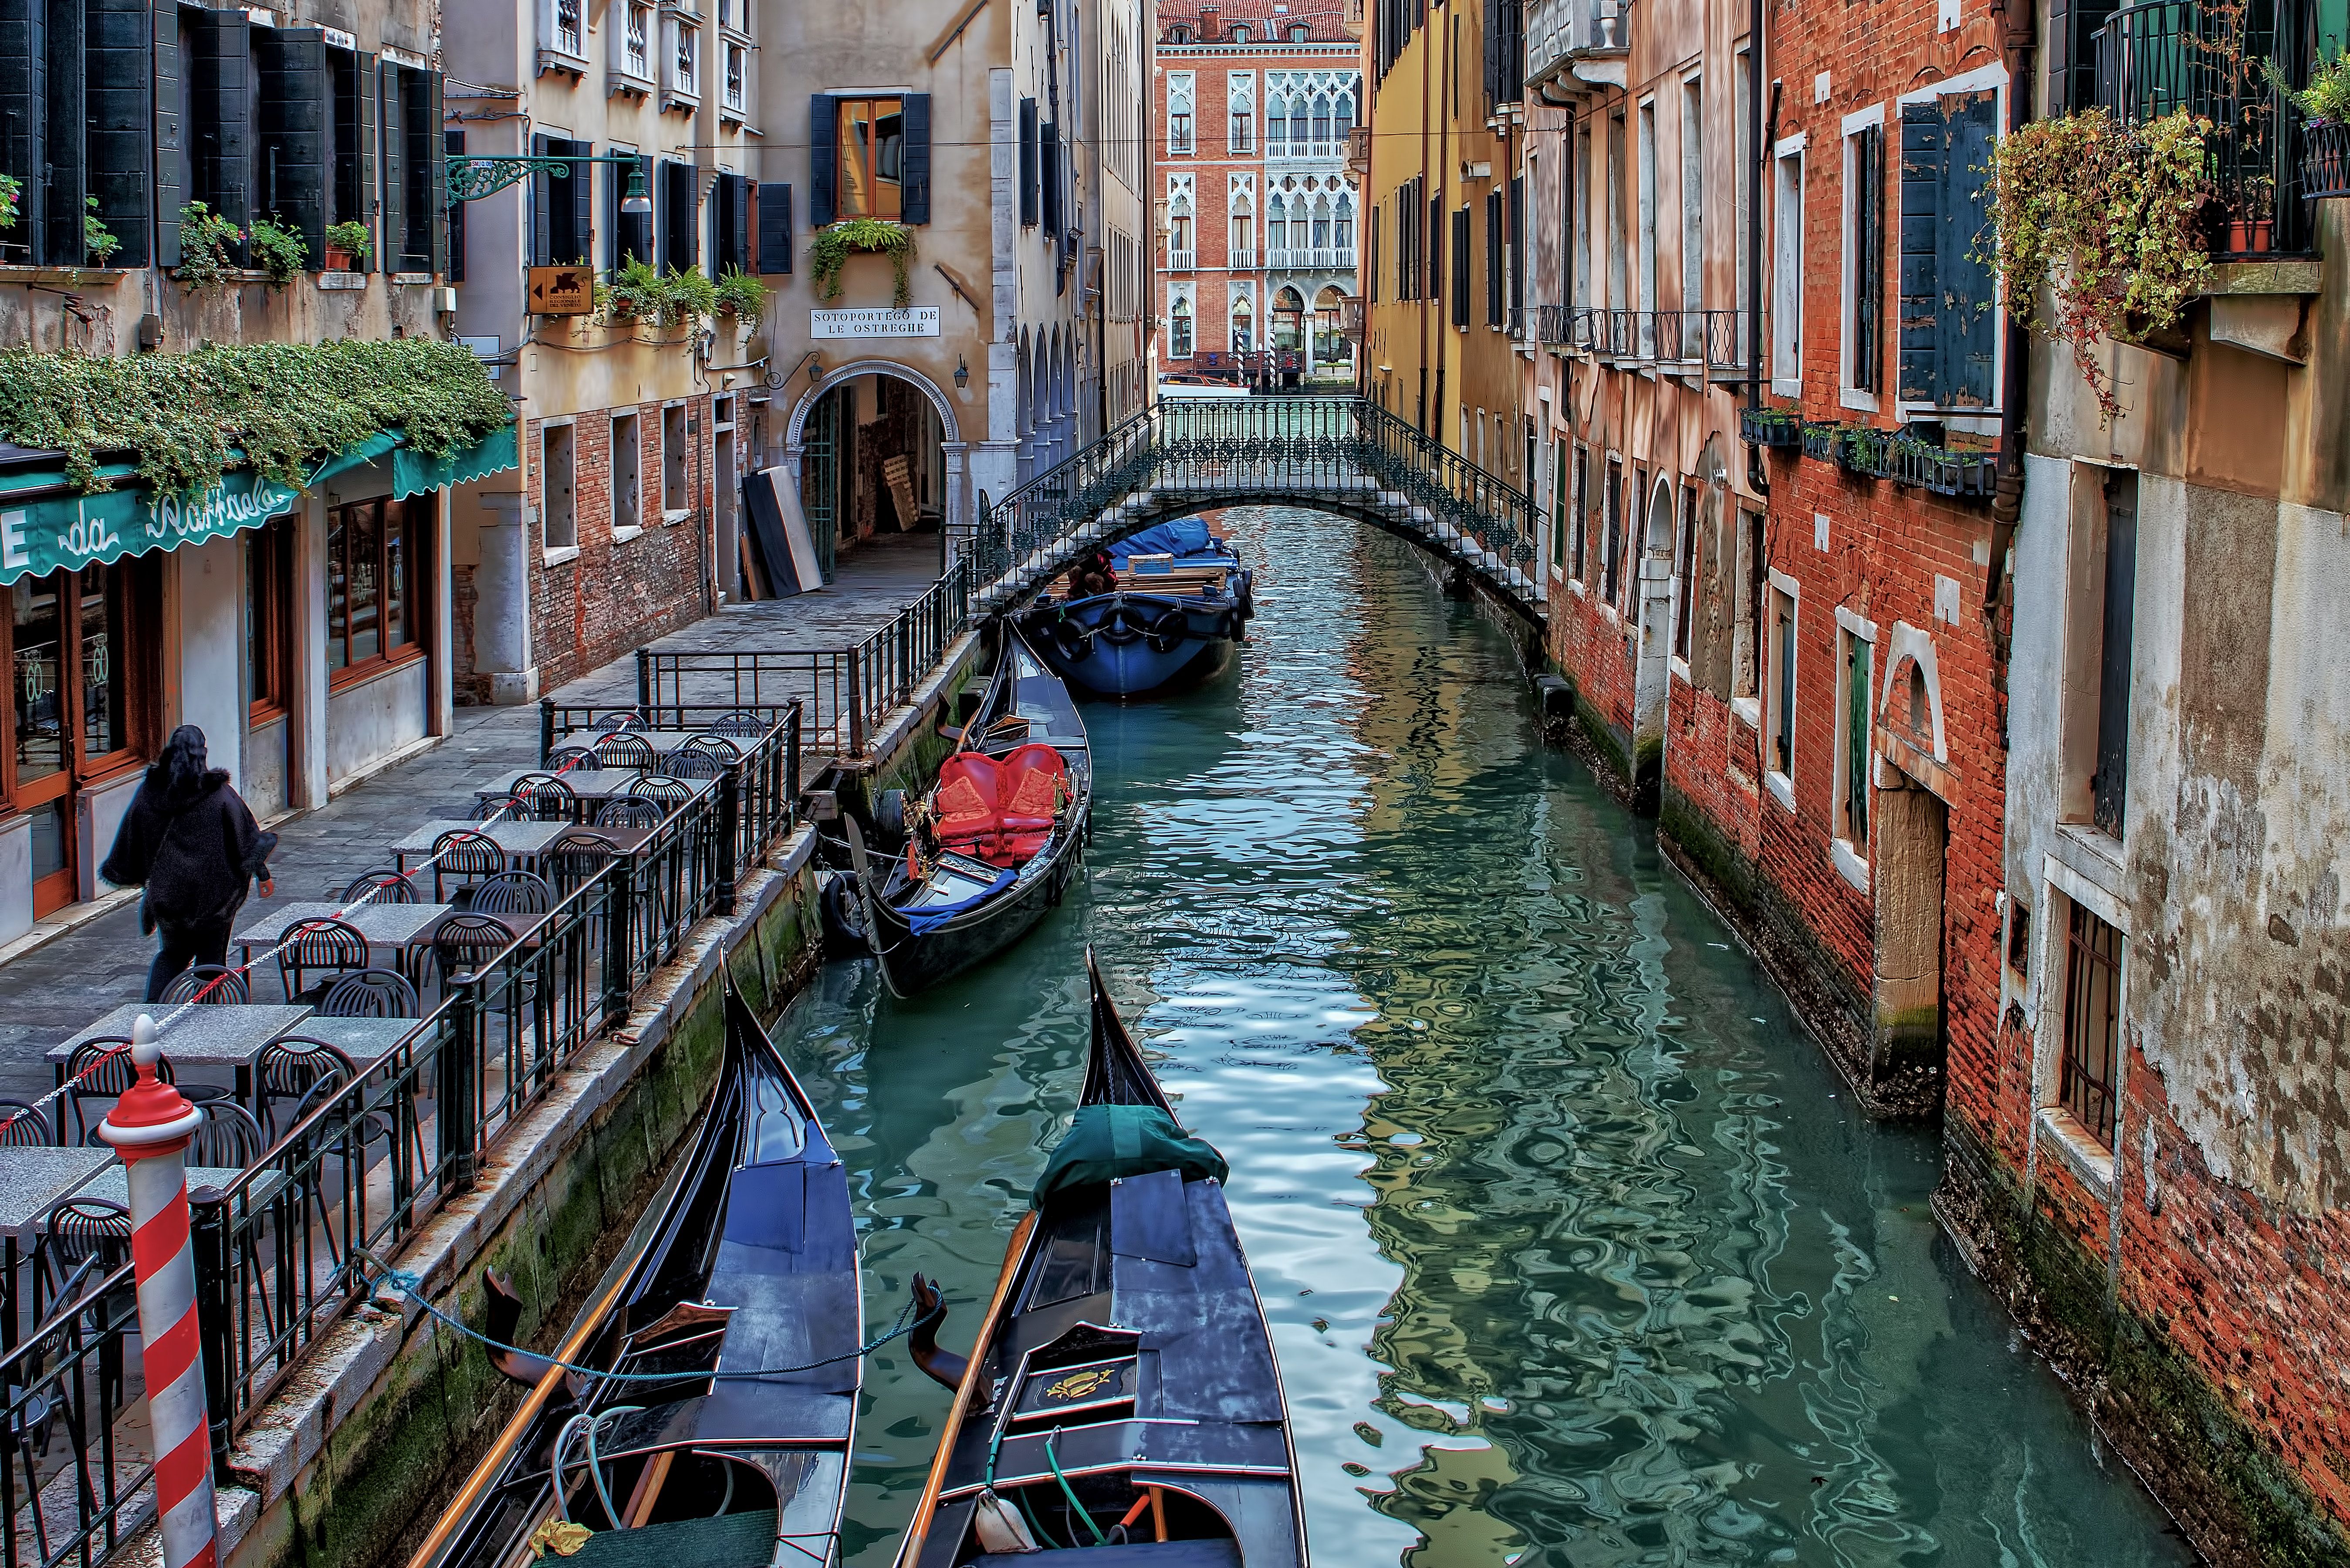 Boats line a colorful canal in Venice.